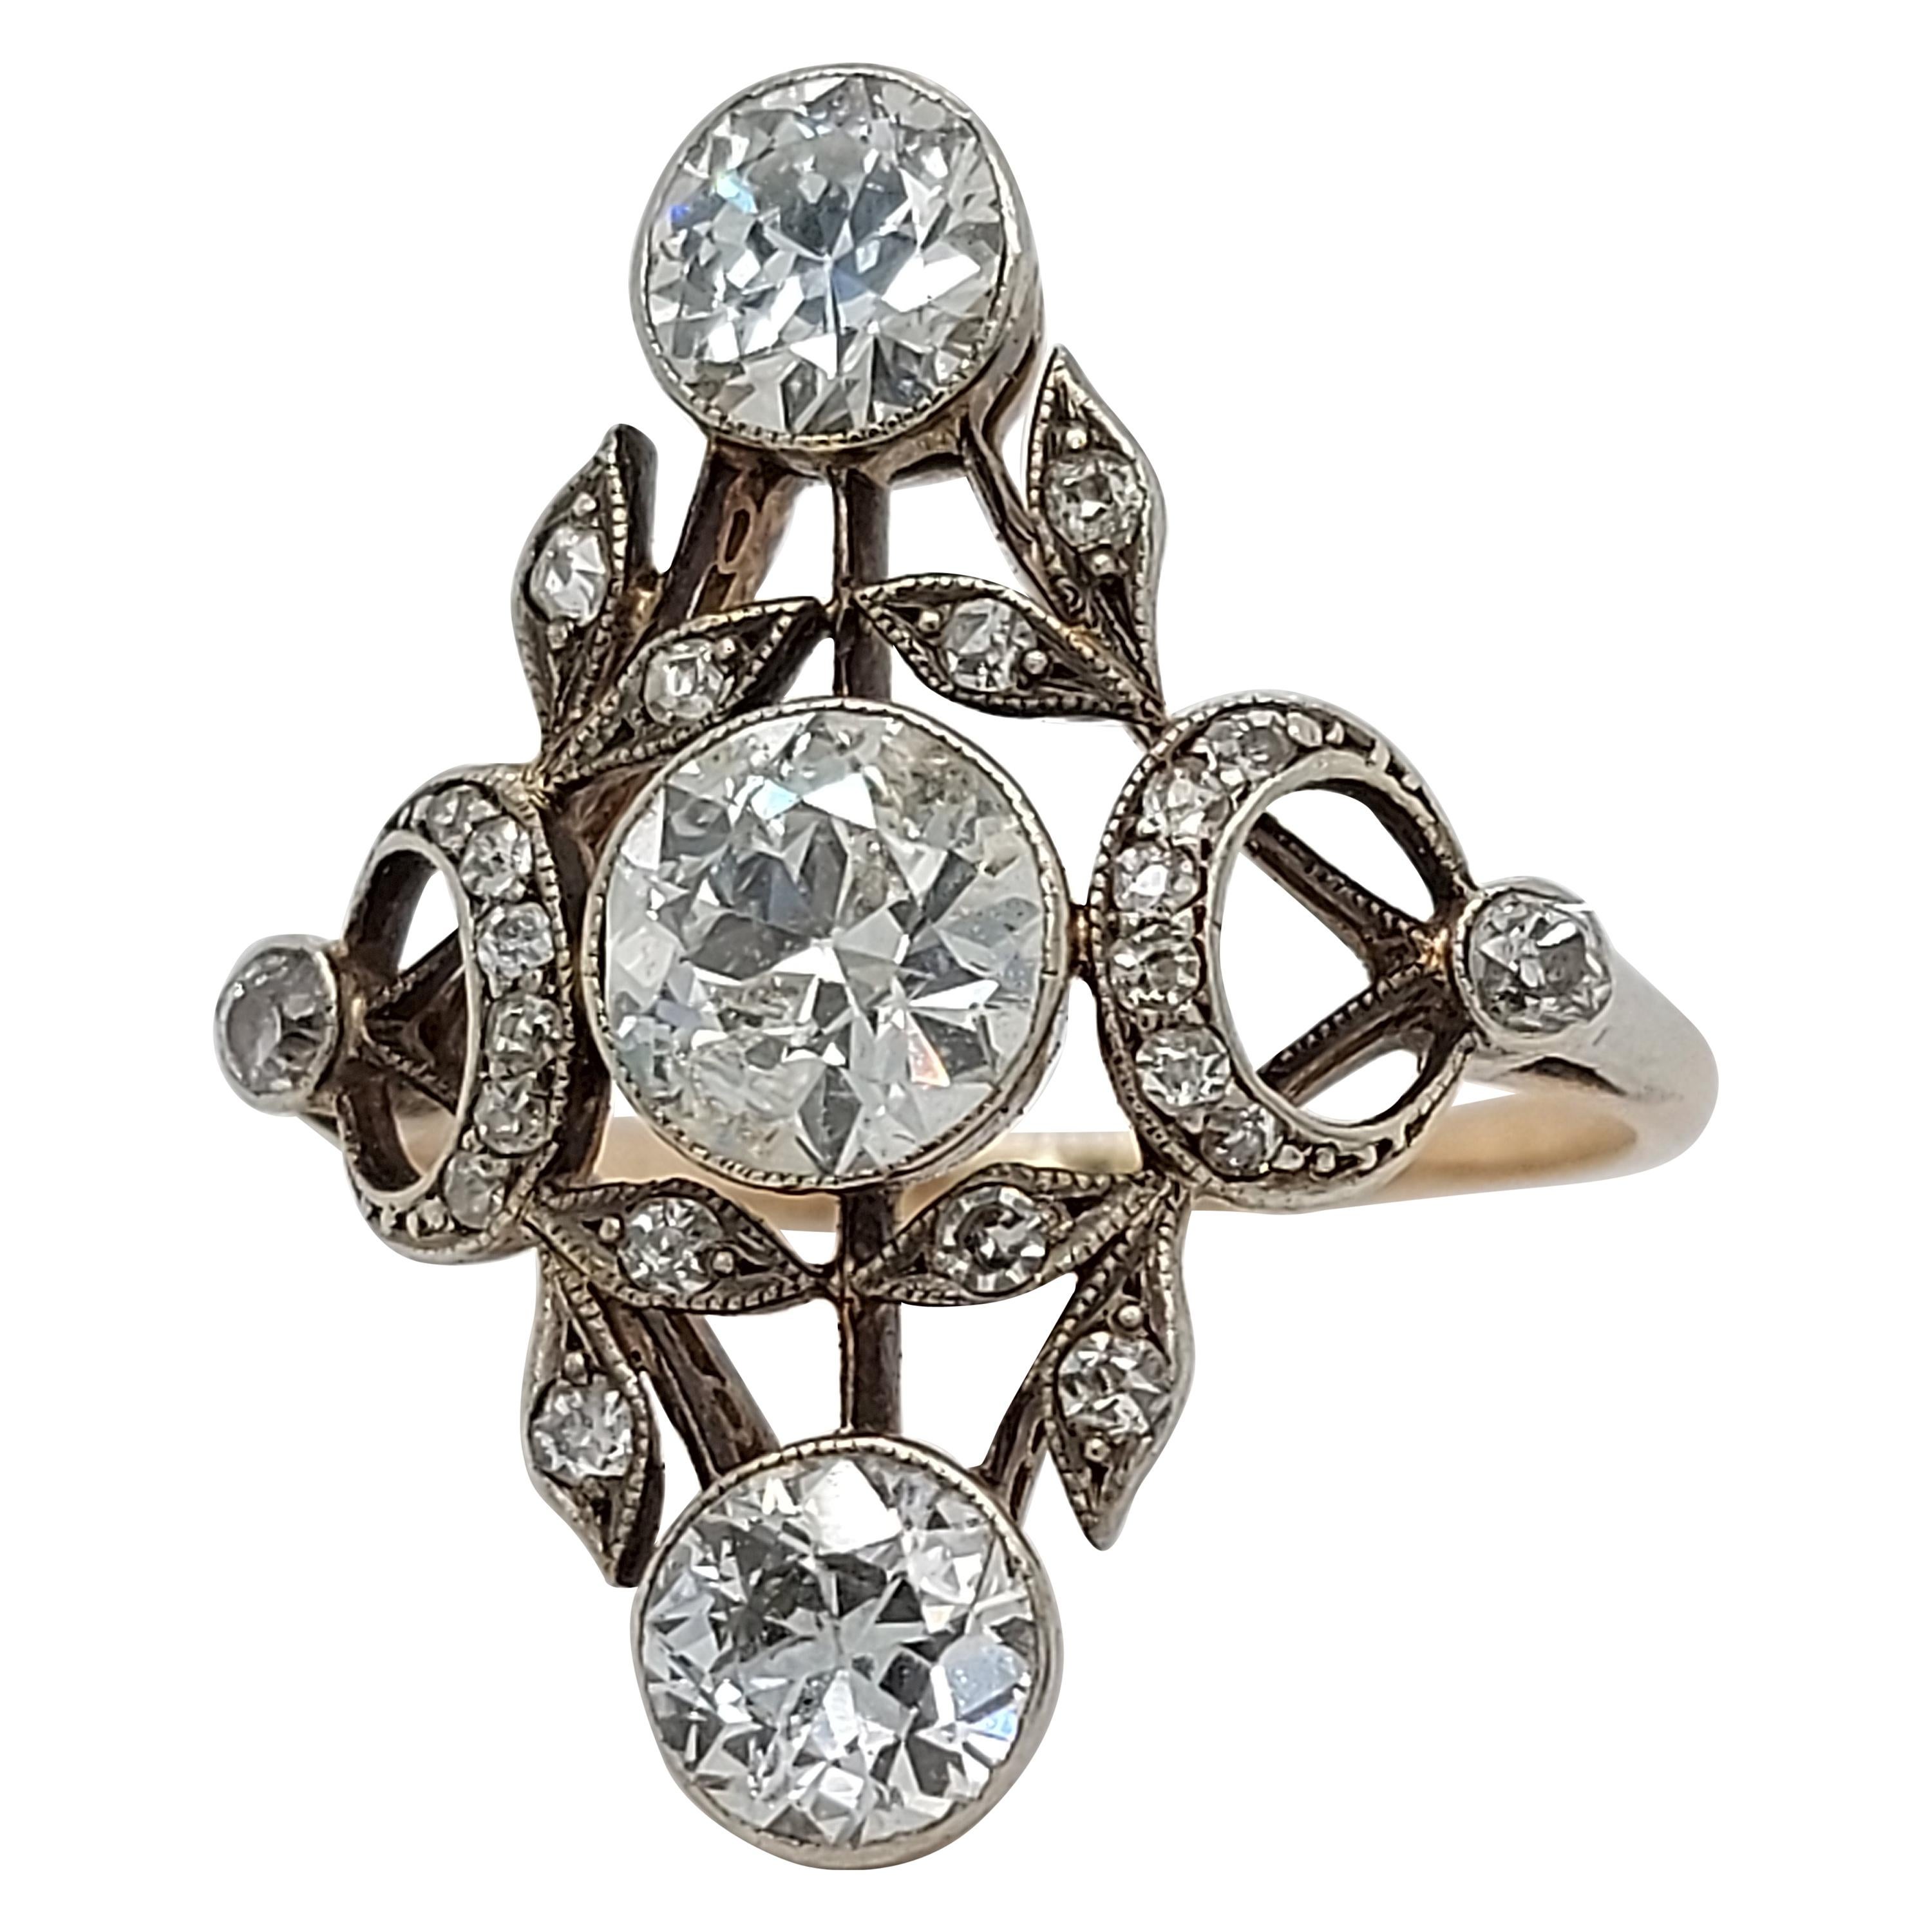 Stunning 18 Karat Gold and Silver Ring with Diamonds from the 1900s, Trilogy